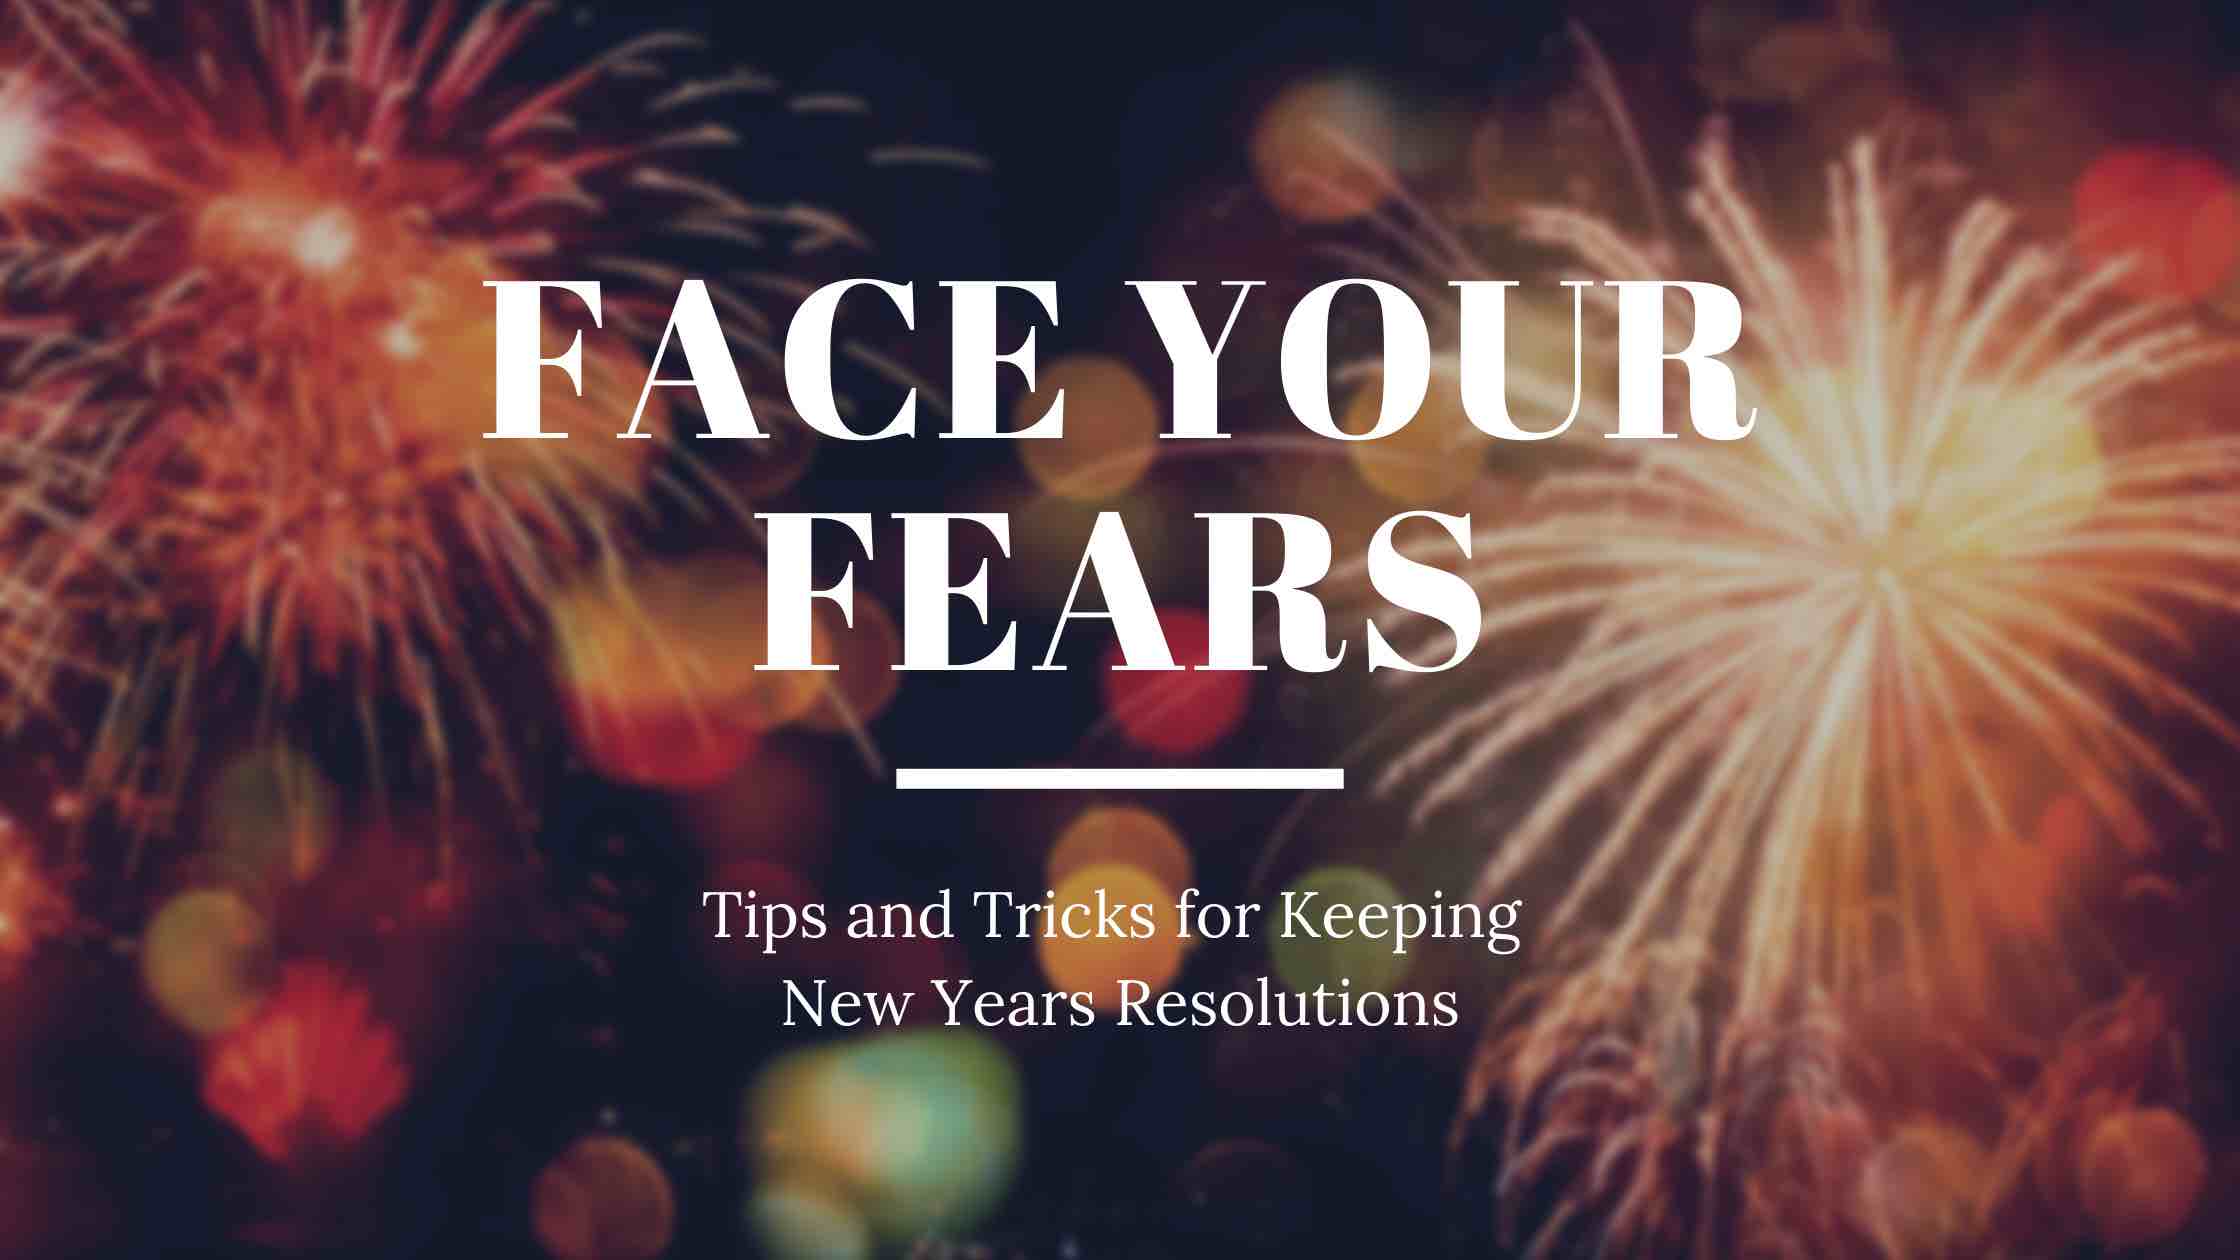 Fireworks go off in the background as a metaphor for how to keep your resolutions, one idea being facing your fears.